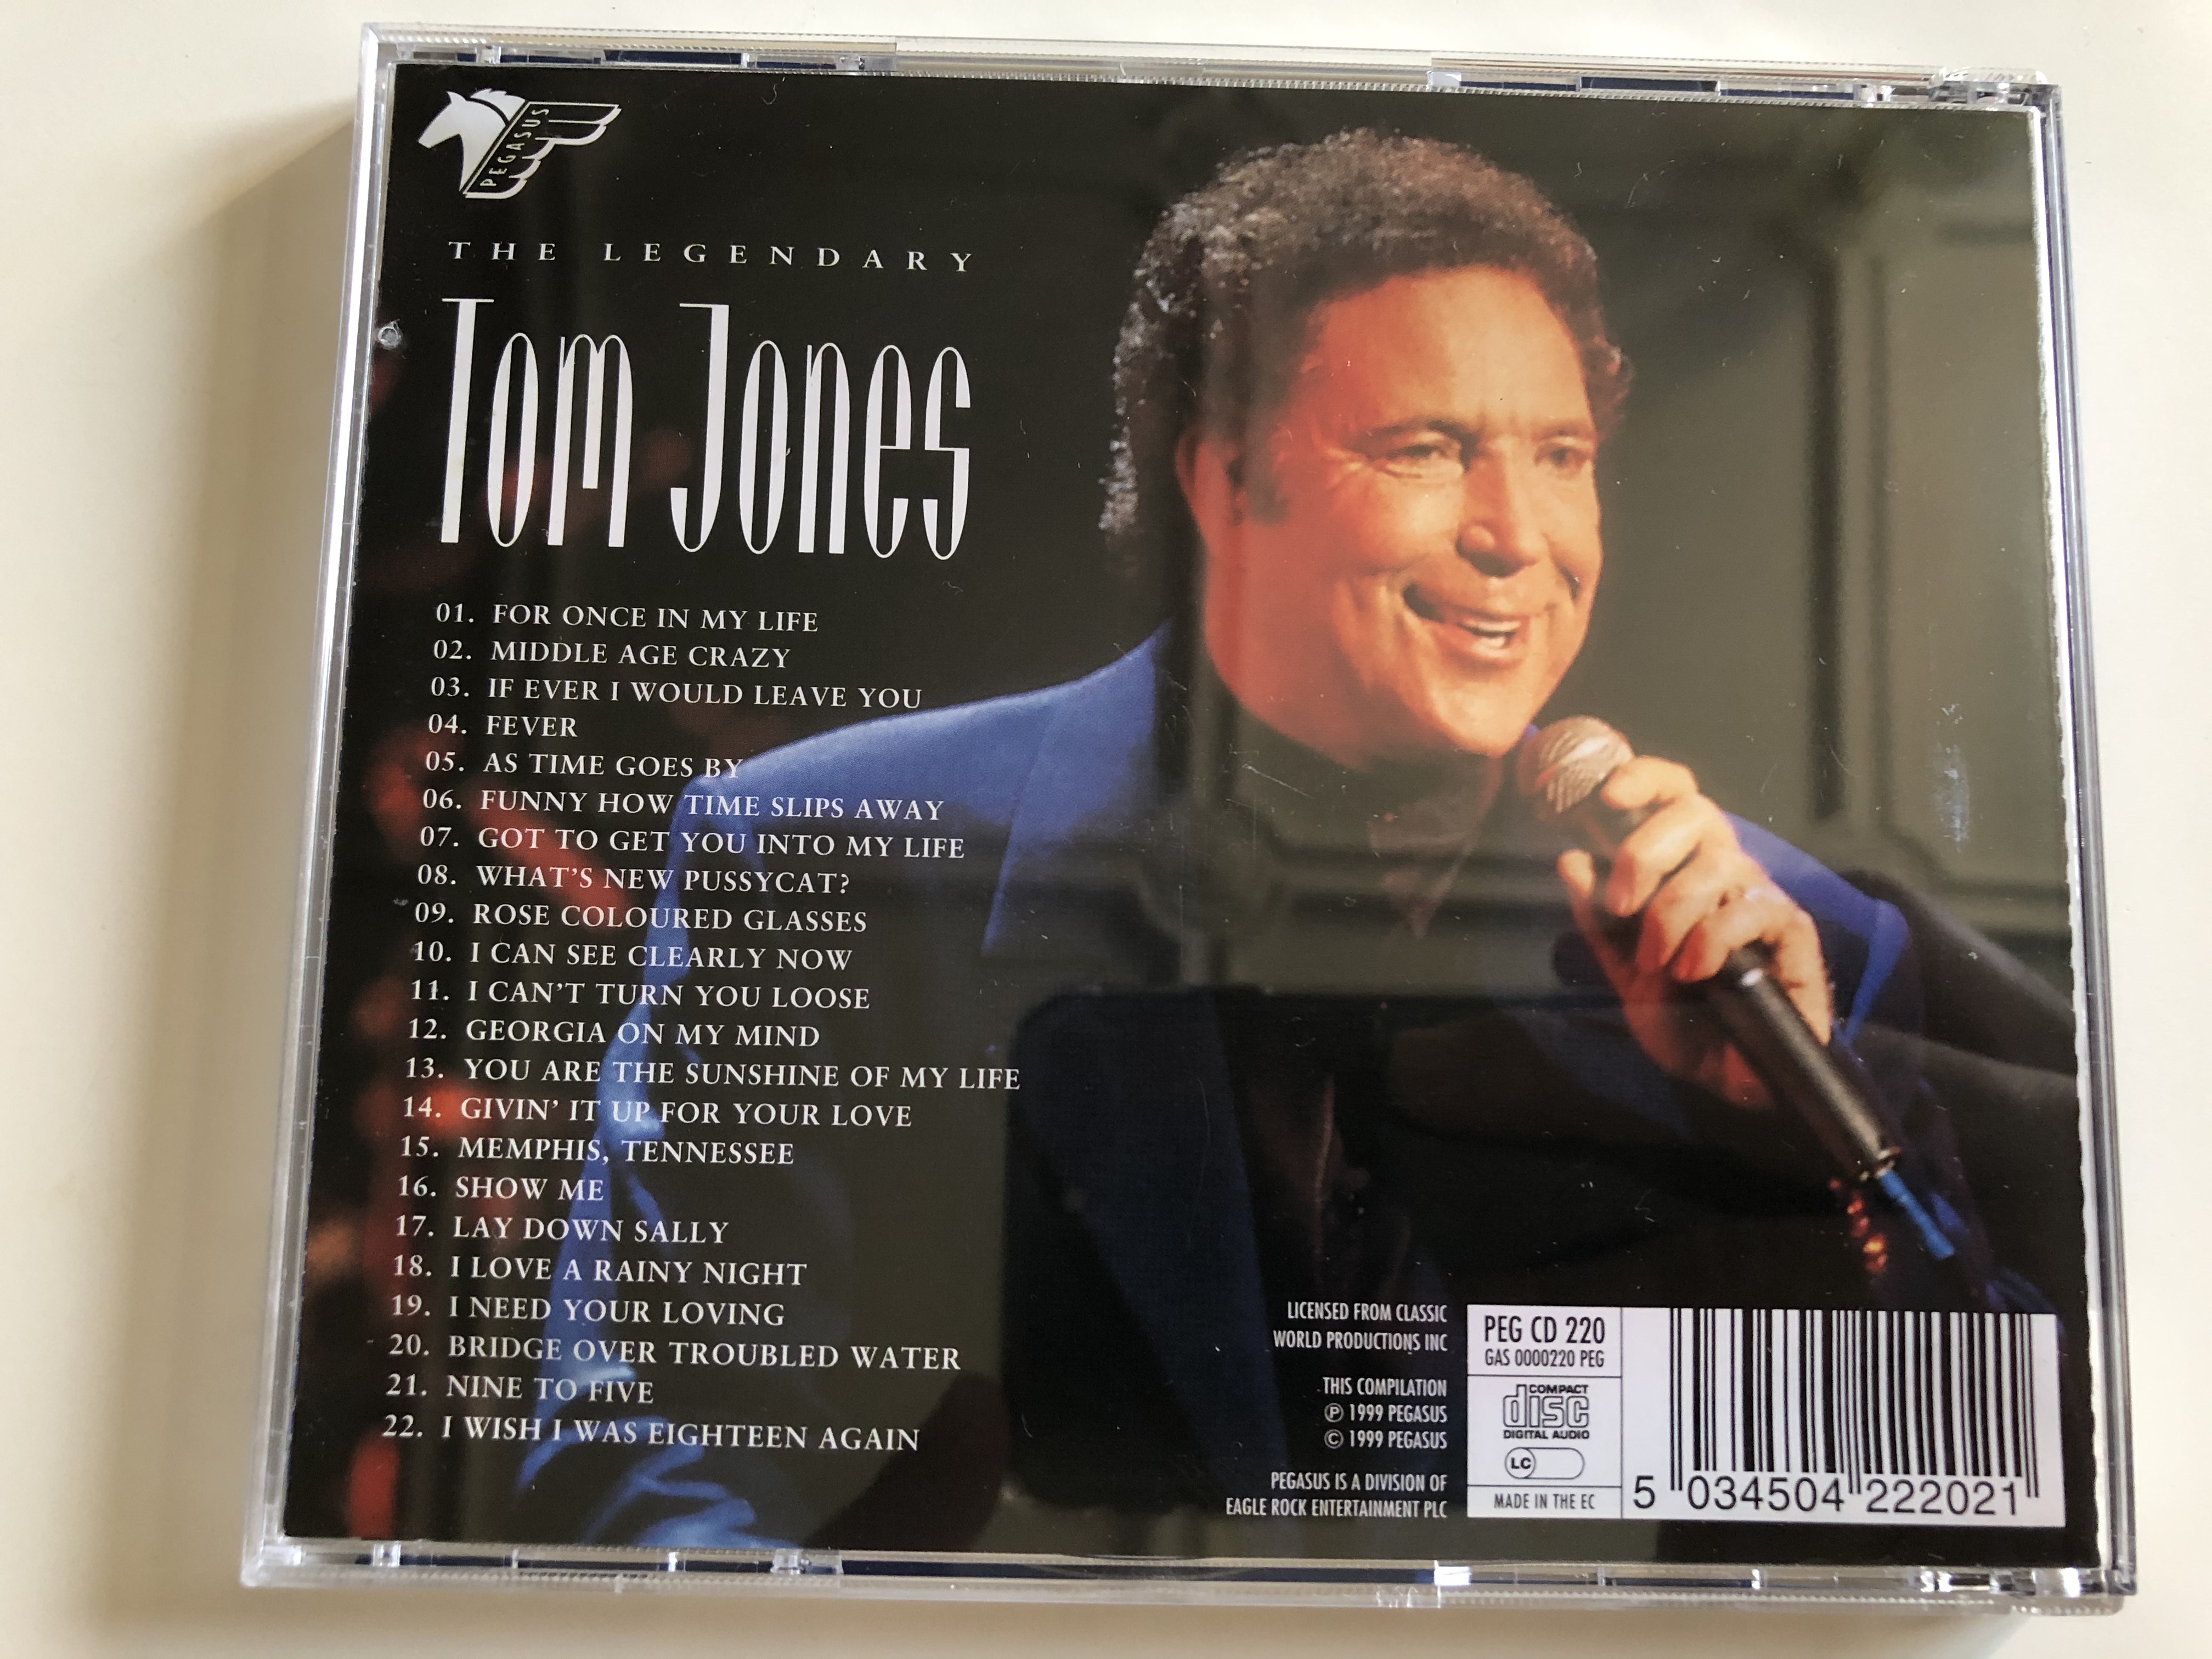 the-legendary-tom-jones-including-what-s-new-pussycat-i-can-see-clearly-now-memphis-tennessee-lay-down-sally-fever-pegasus-audio-cd-1999-peg-cd-220-5-.jpg